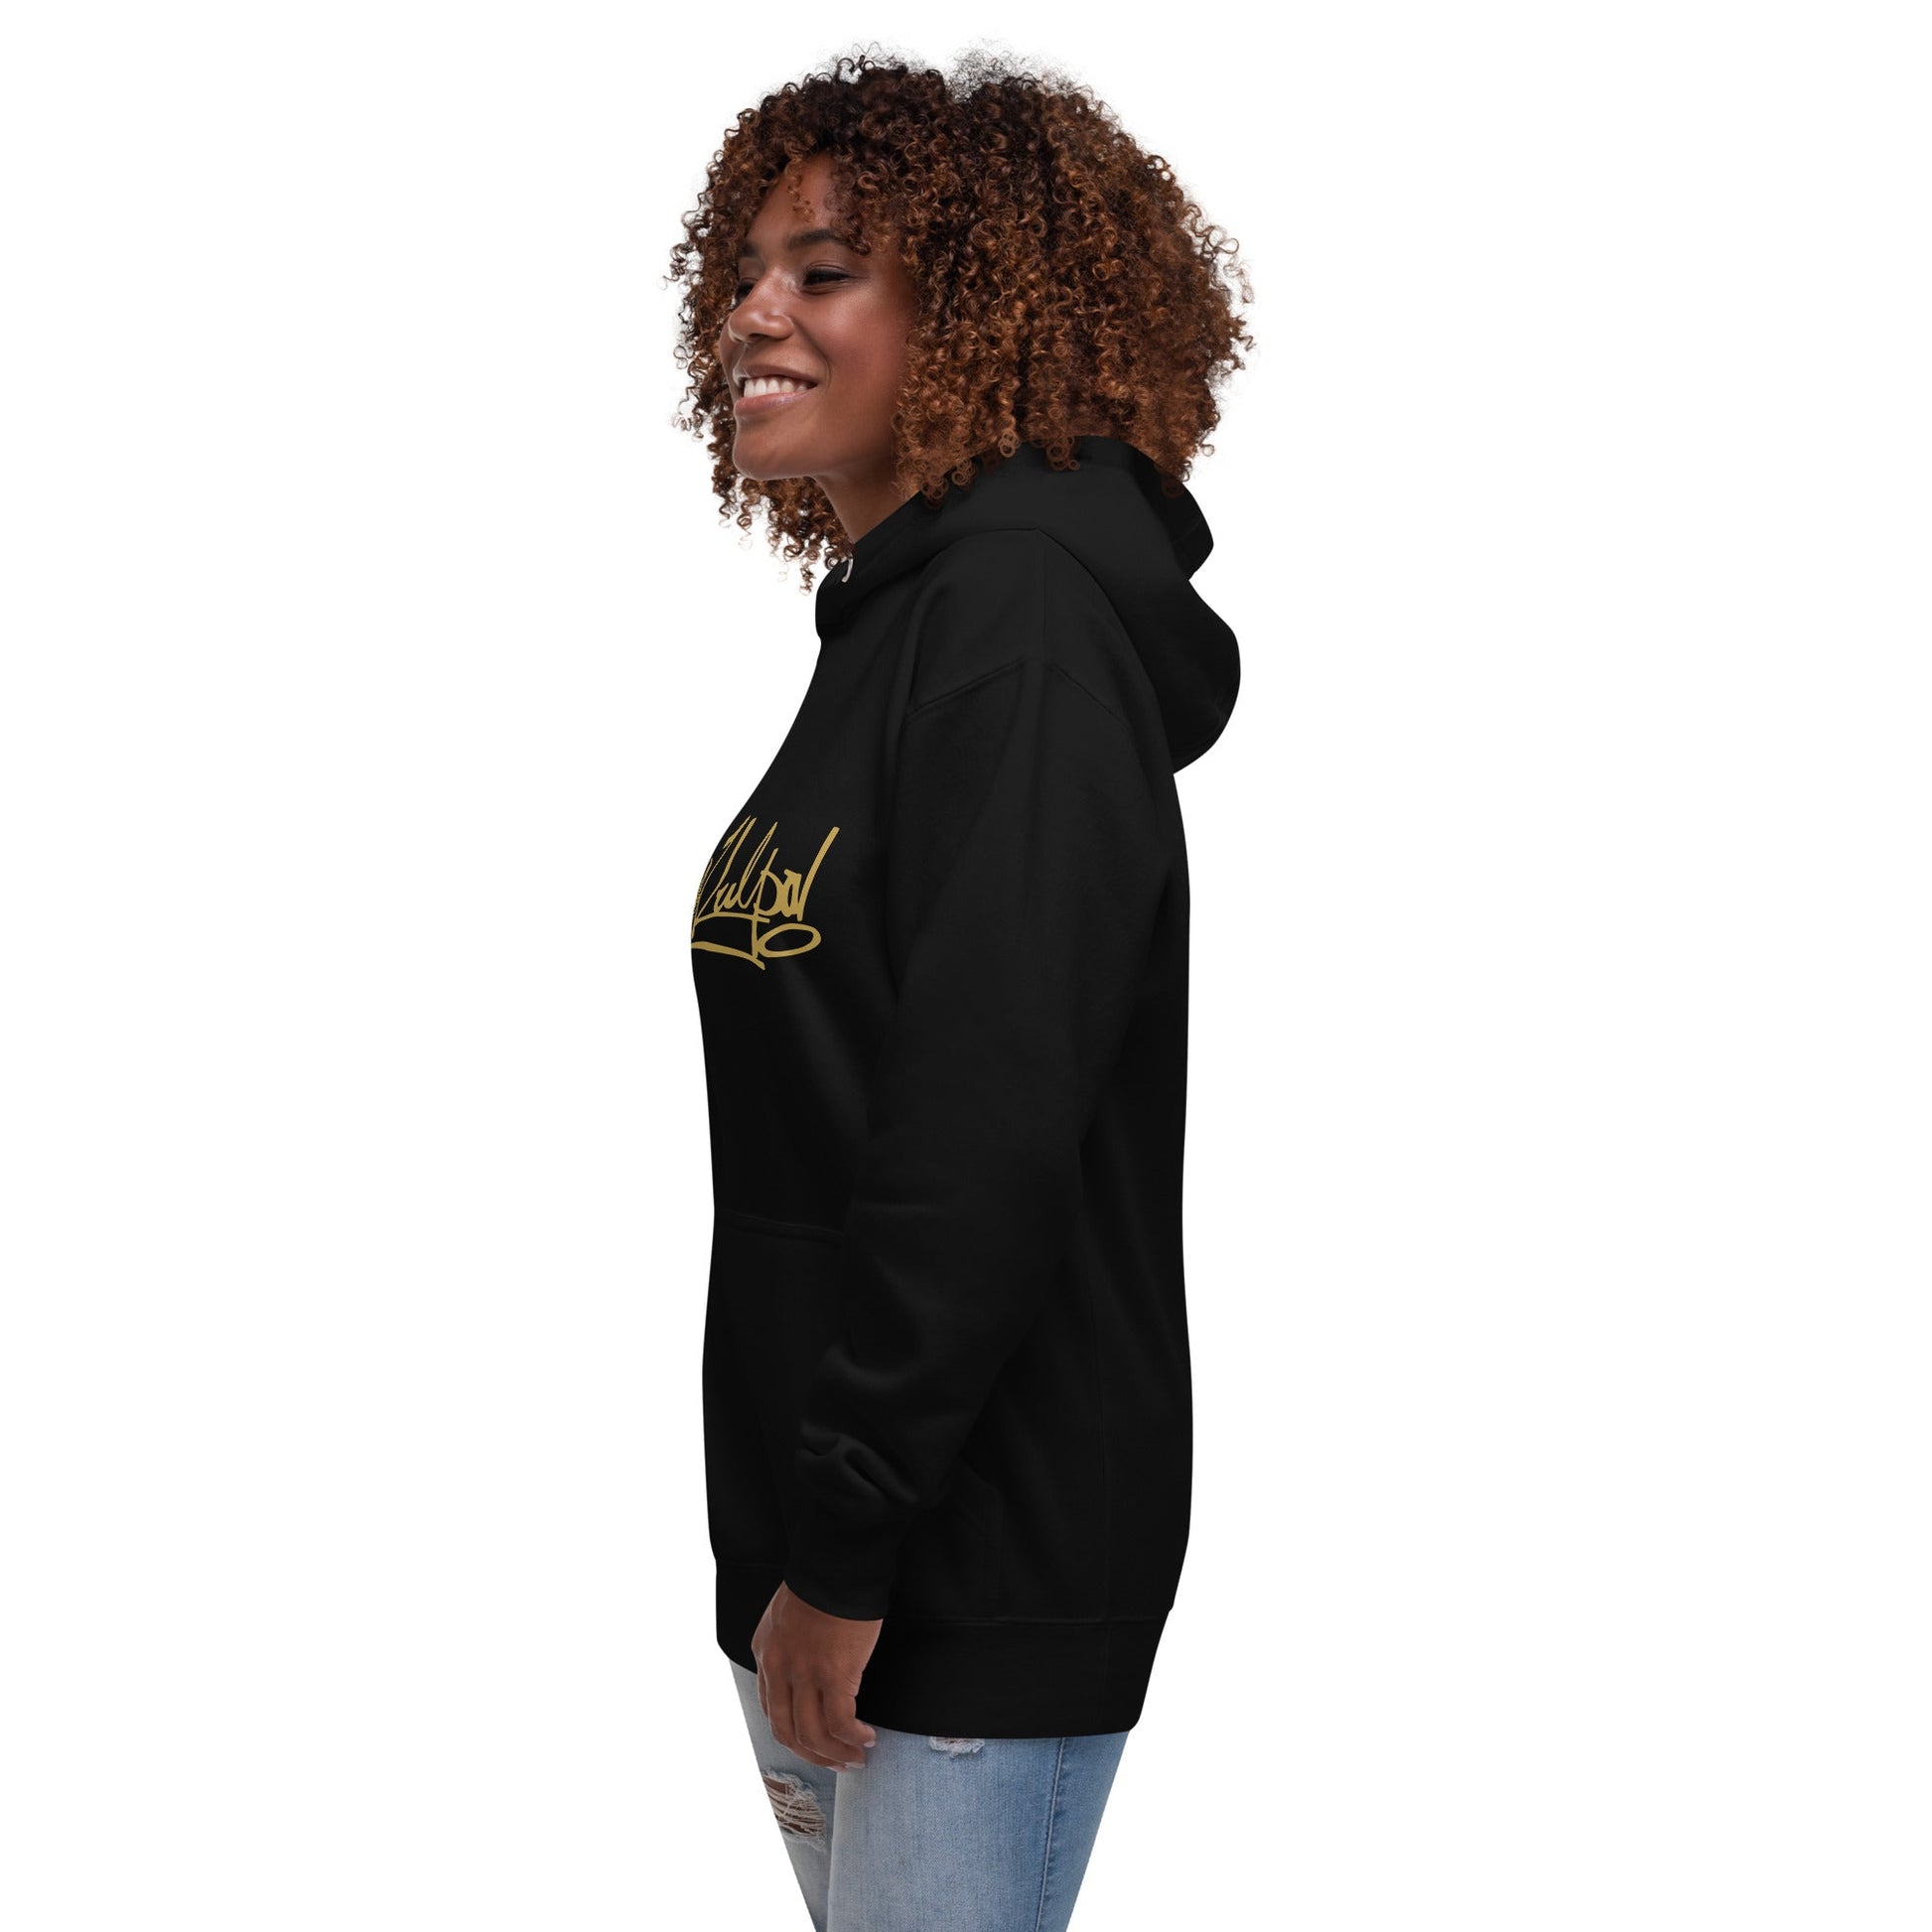 Introducing the MeaKulpa Black Premium Hoodie – where sophistication meets streetwear in a perfect harmony of style. With a black premium hoodie, meticulously crafted for those who appreciate the finer things in life.a striking MeaKulpa print in matt gold adorns the front, adding a touch of opulence to your ensemble. The gold detailing captures the essence of exclusivity, making this hoodie a statement piece for those who seek a blend of luxury and urban flair.